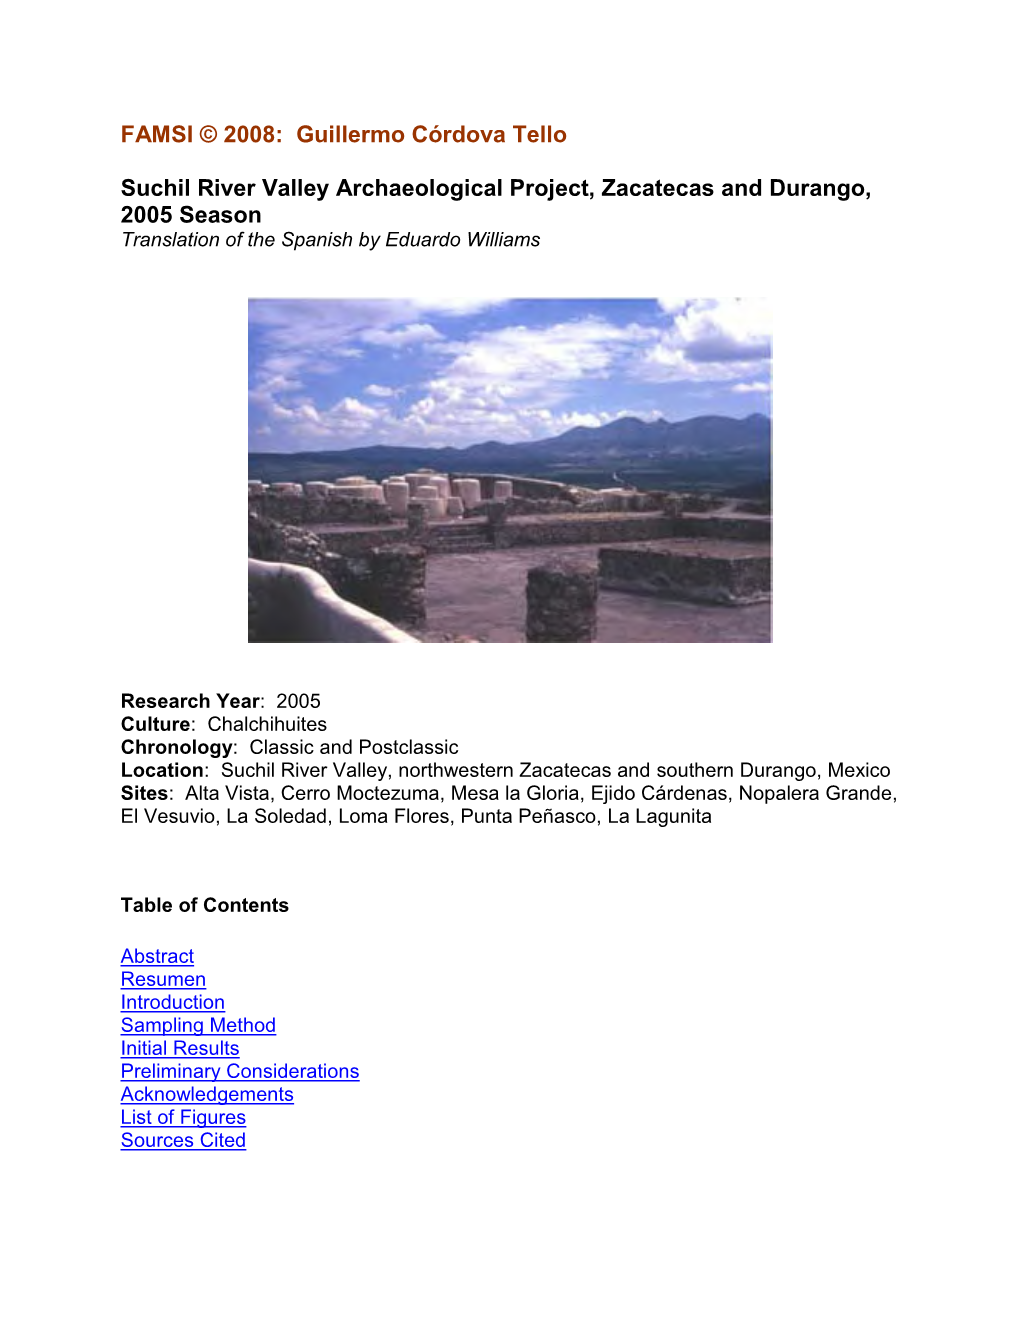 Suchil River Valley Archaeological Project, Zacatecas and Durango, 2005 Season Translation of the Spanish by Eduardo Williams